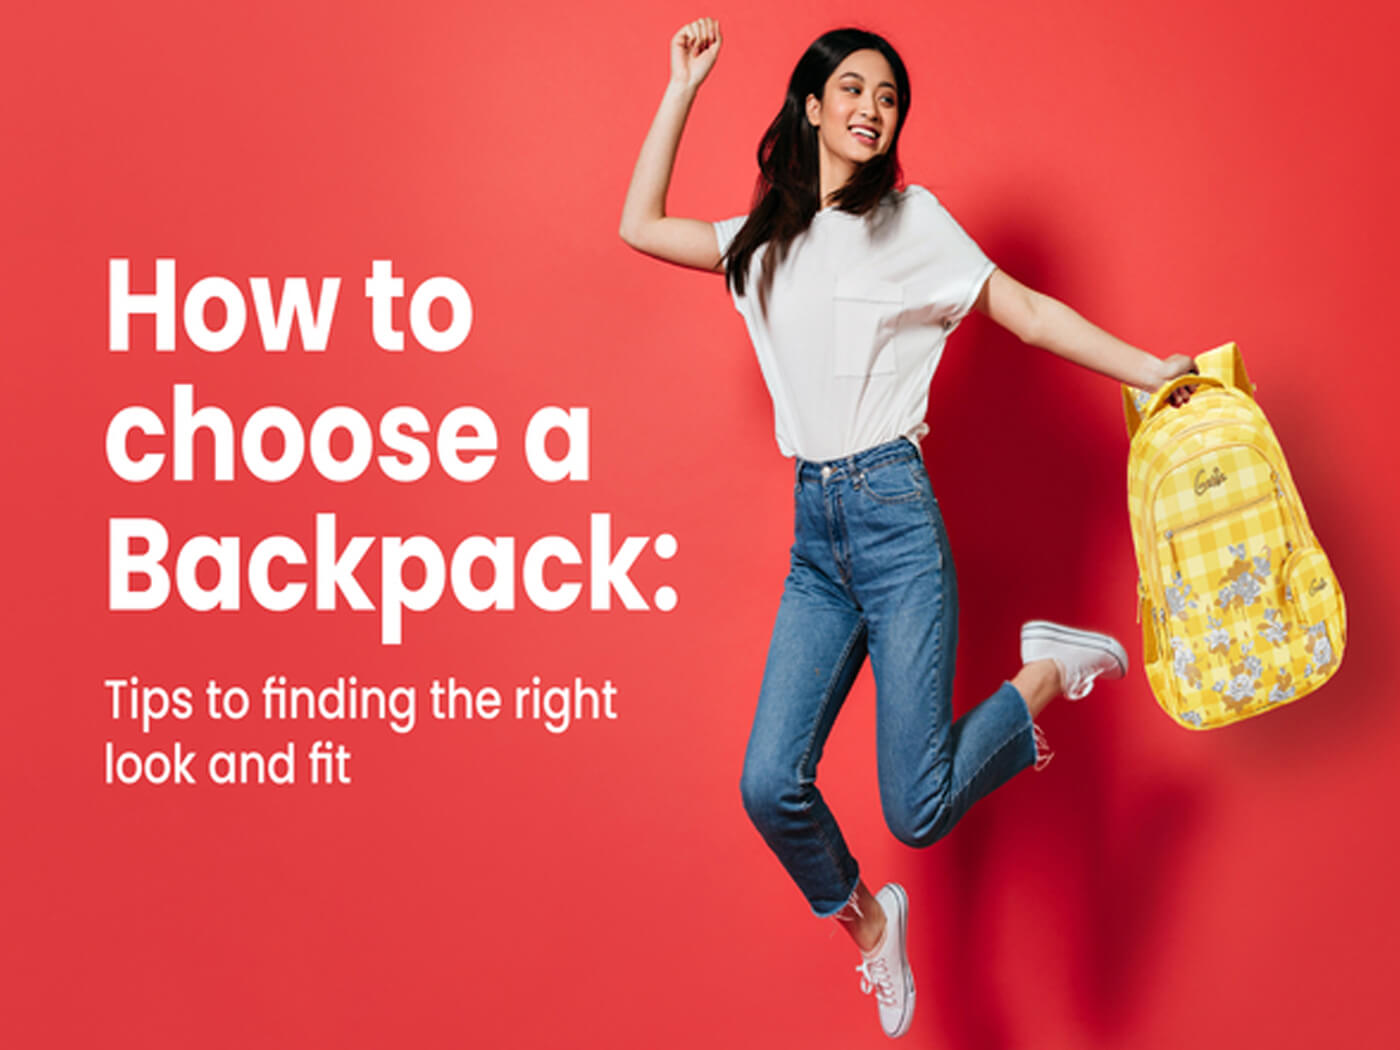 How to Choose a Backpack: Tips to Finding the Right Look and Fit